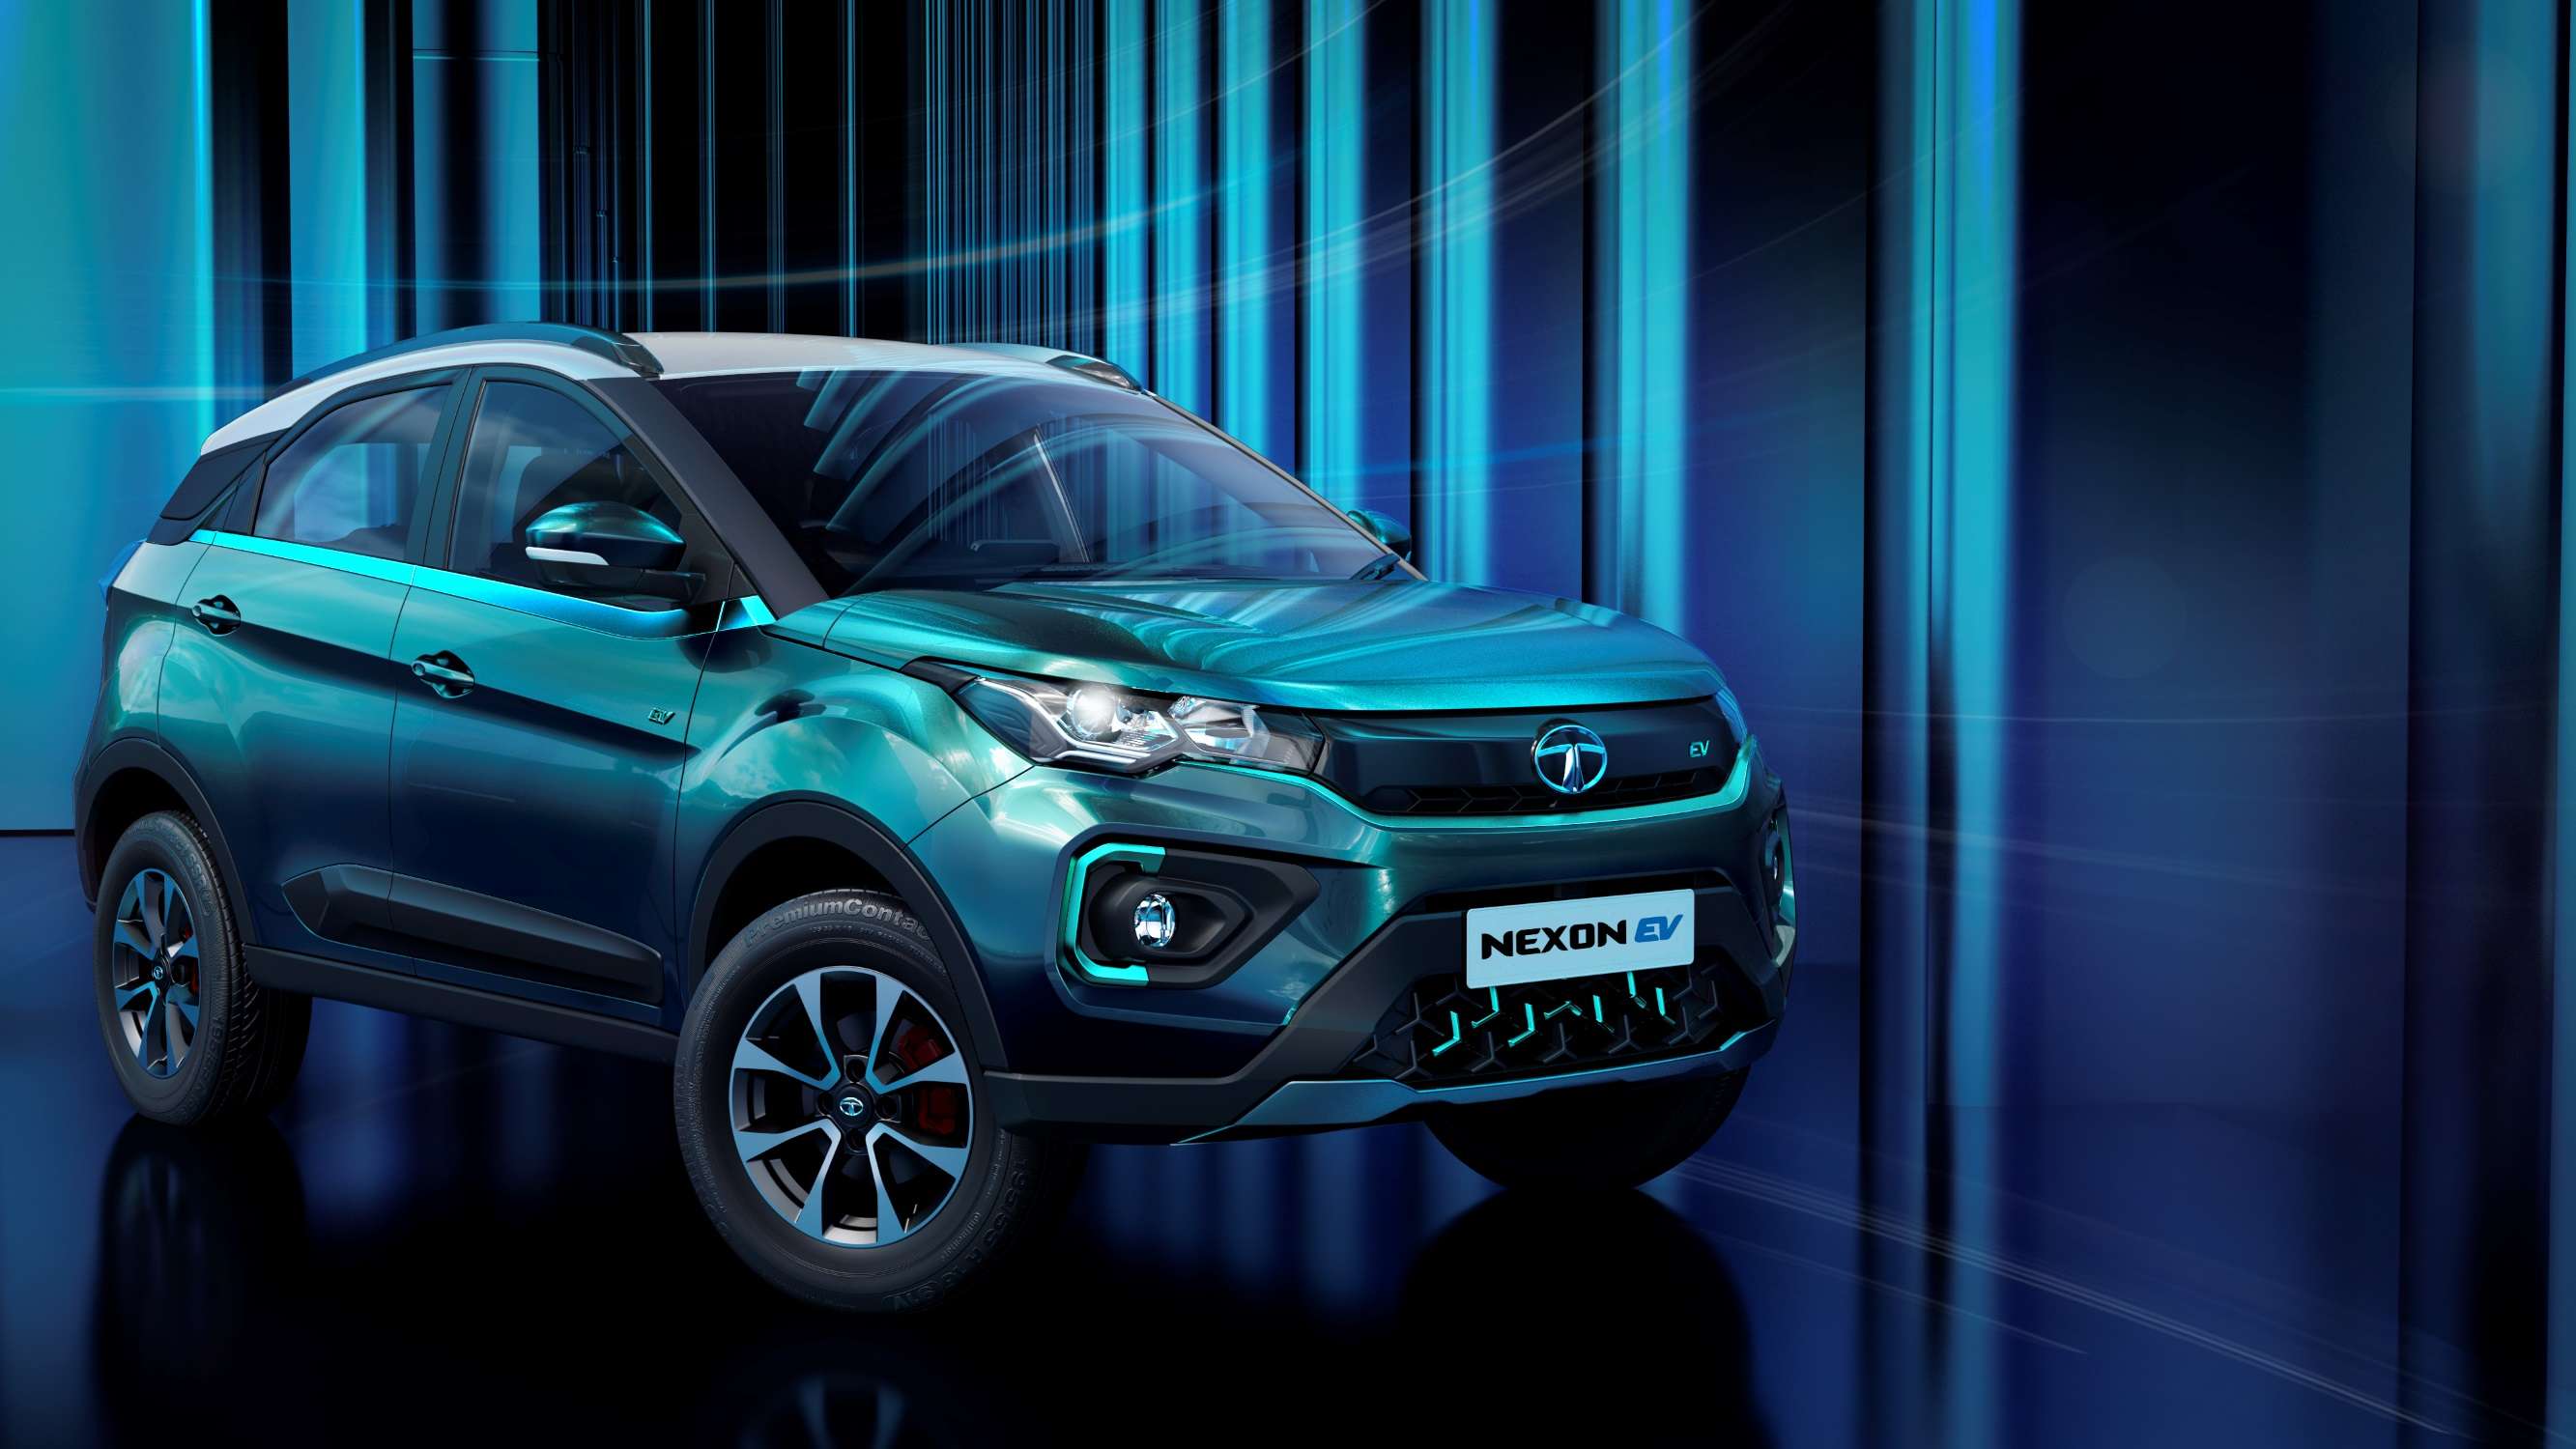  Tata Nexon could diligently force the industry to come out with some practical and realistic answers.